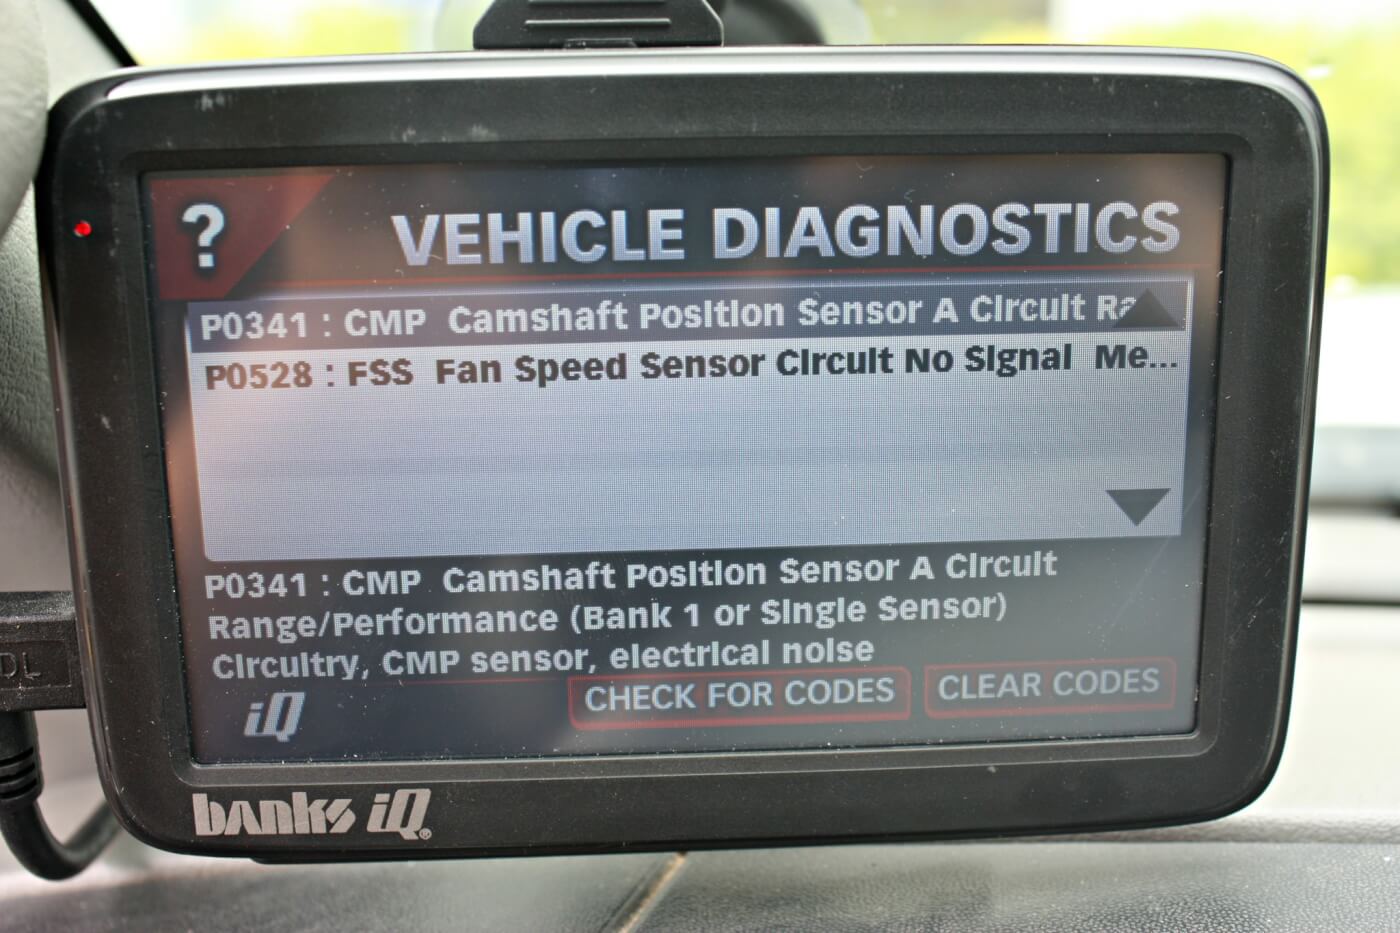 16. The Banks IQ can also be used to scan and clear diagnostic trouble codes found within your Power Stroke engine. In this particular test vehicle, a P0341 codes informs us of a Cam Position Sensor error along with a possible issue the owner was not yet aware of with the engine fan clutch assembly.